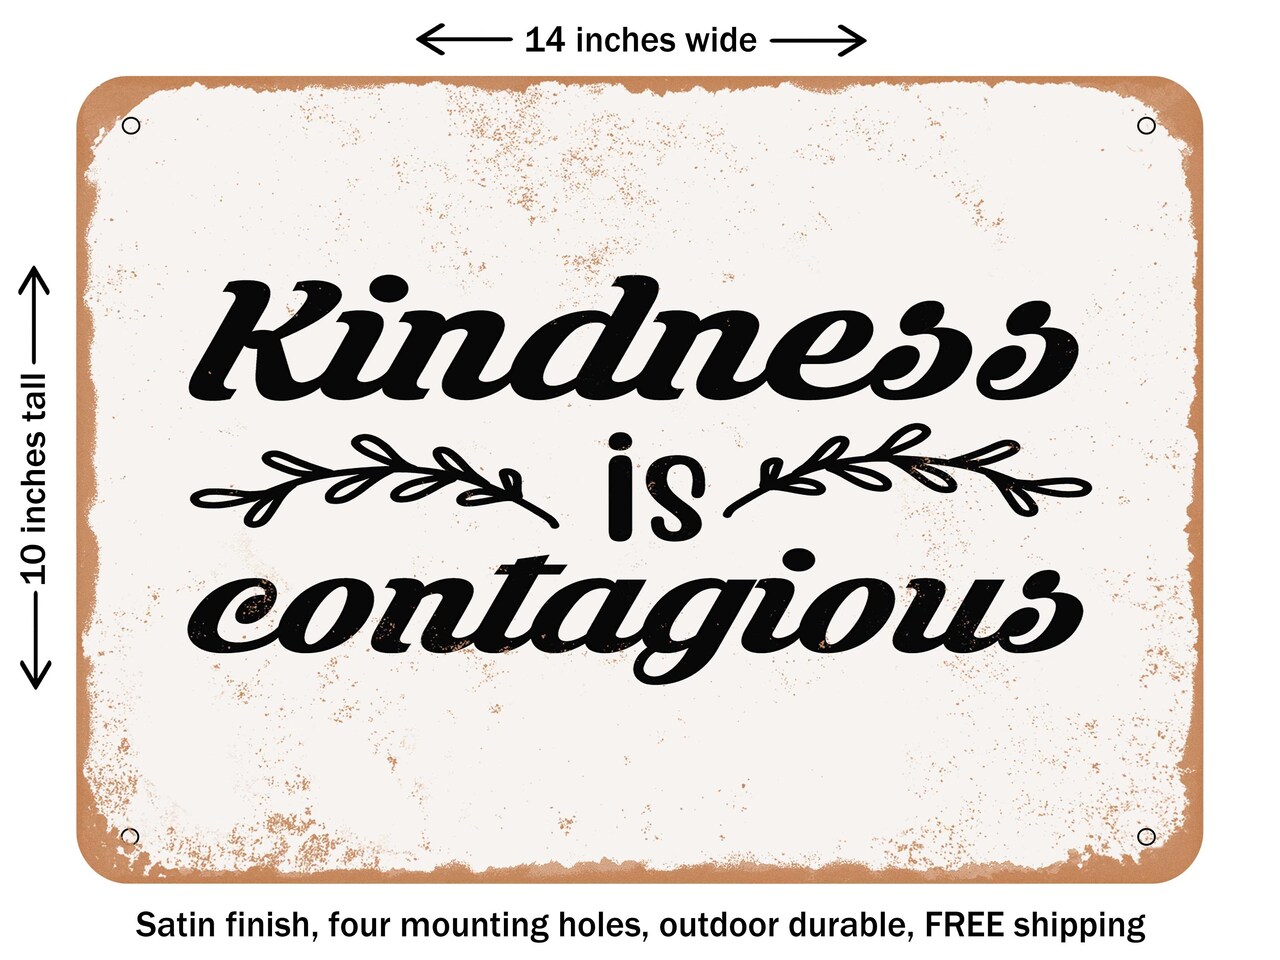 DECORATIVE METAL SIGN - Kindness is Contagious - Vintage Rusty Look